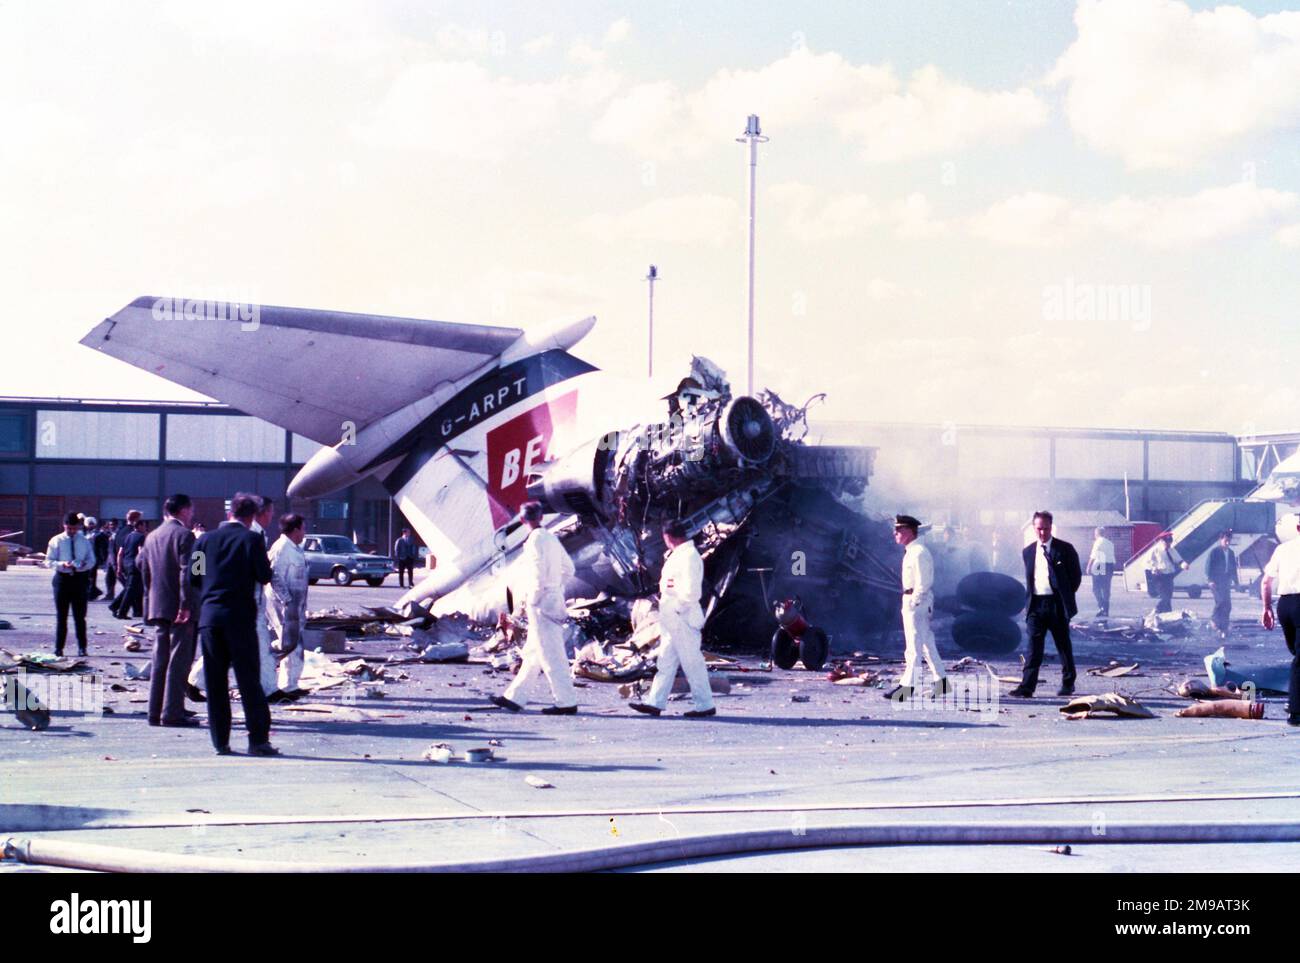 Hawker Siddeley Trident 1C G-ARPT (msn 2121), of British European Airways, at London Heathrow Airport, after the crash of BKS Air Transport Airspeed Ambassador G-AMAD on 3 July 1968. Airspeed Ambassador, G-AMAD, was flying a cargo of 8 horses from Deauville to London. When approaching the runway 28R threshold at London Airport, the left wing suddenly dropped. The wing-tip, followed by the left main gear wheels touched the grass to the left of the runway. The crew tried to increase power to go around, but the aircraft flew on with an increasing bank angle. The plane struck two parked BEA HS-1 Stock Photo